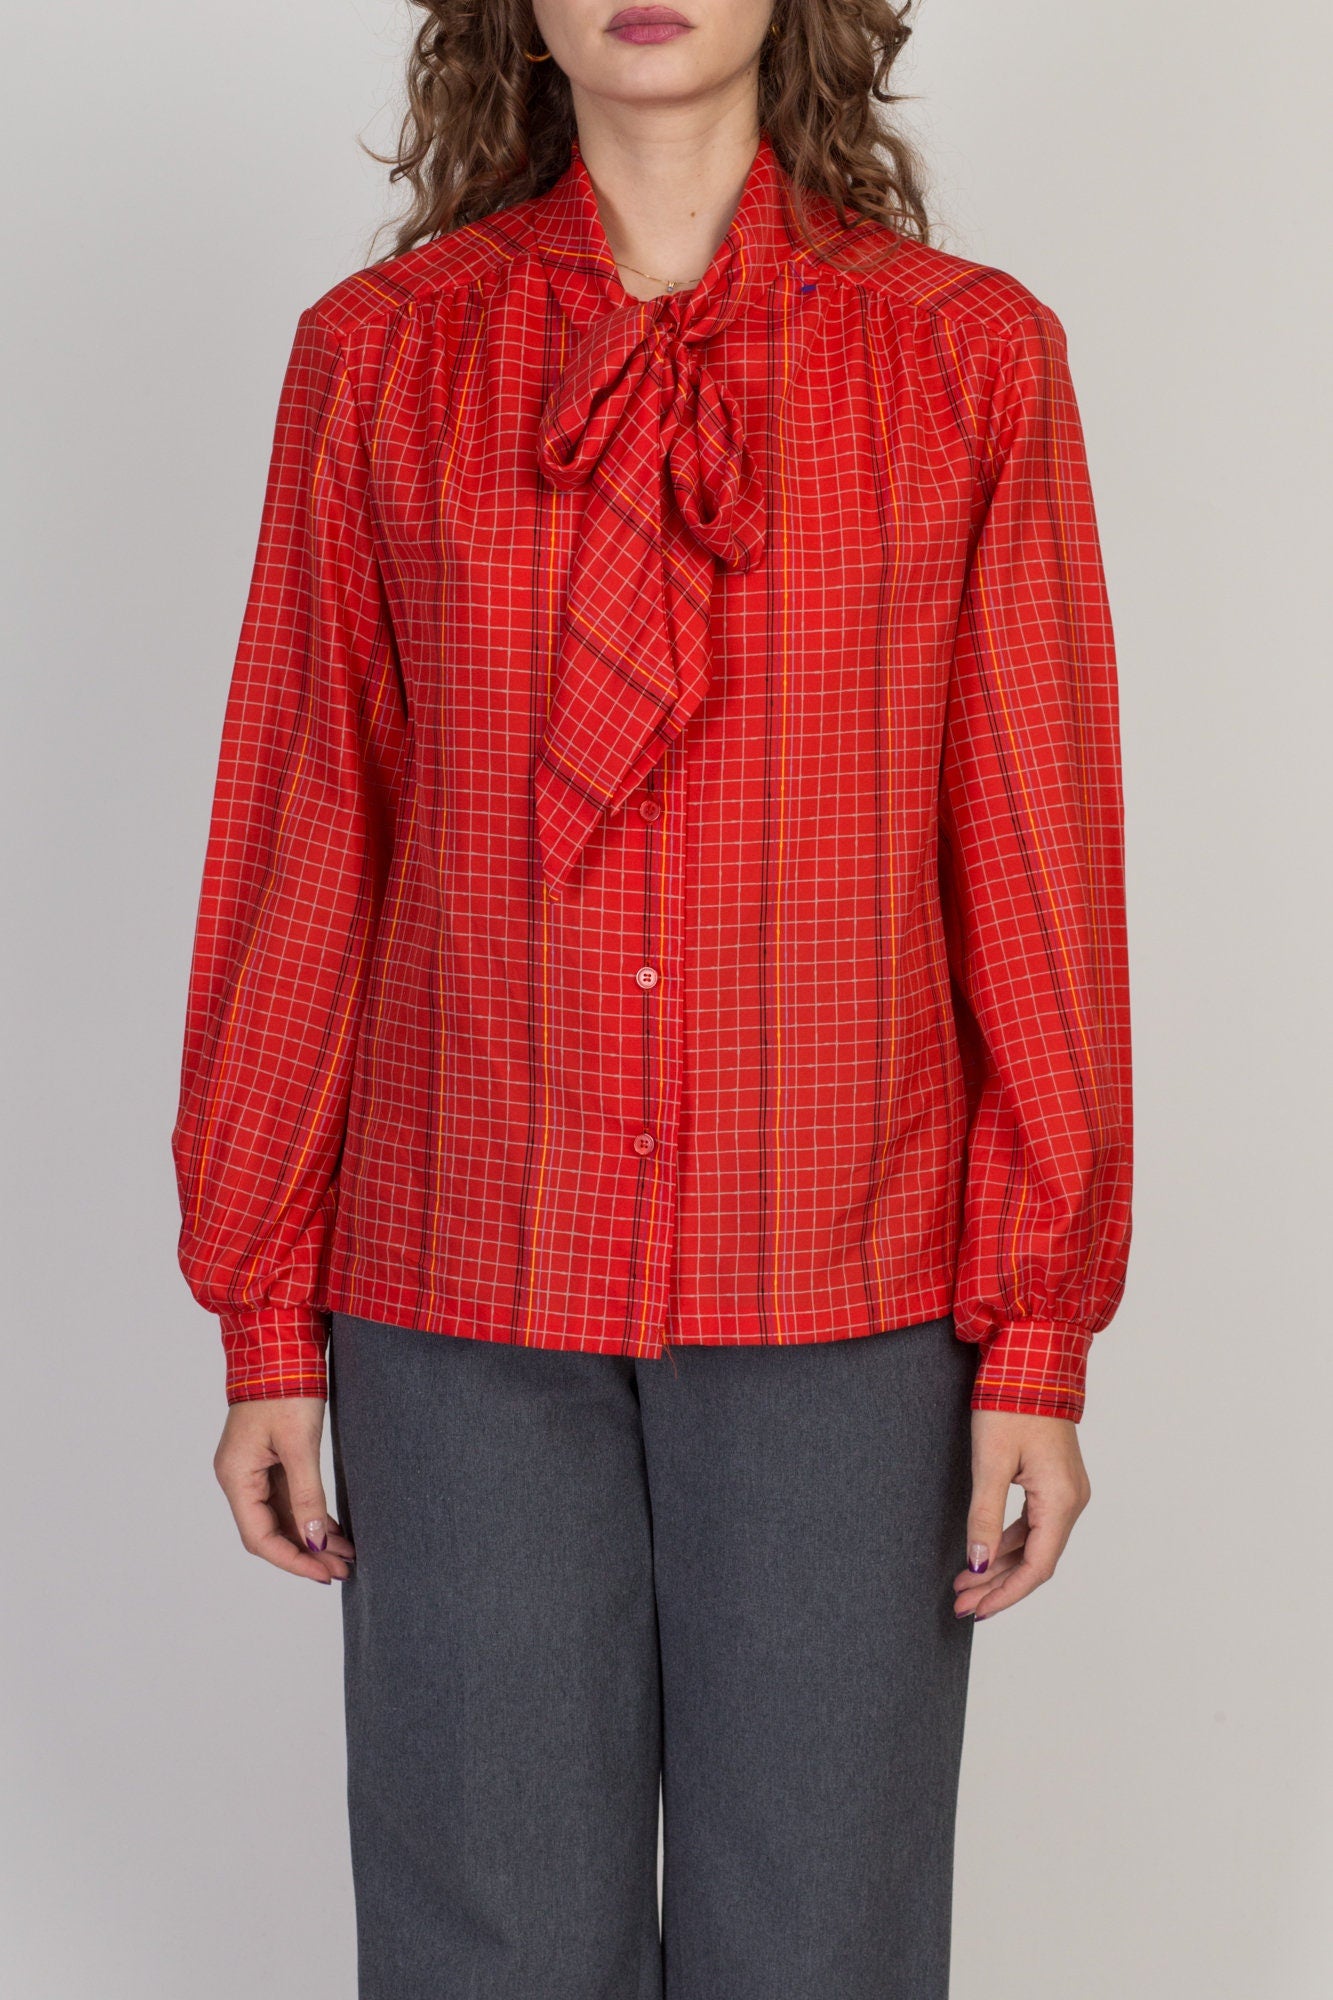 80s Red Grid Striped Secretary Blouse - Large to XL 